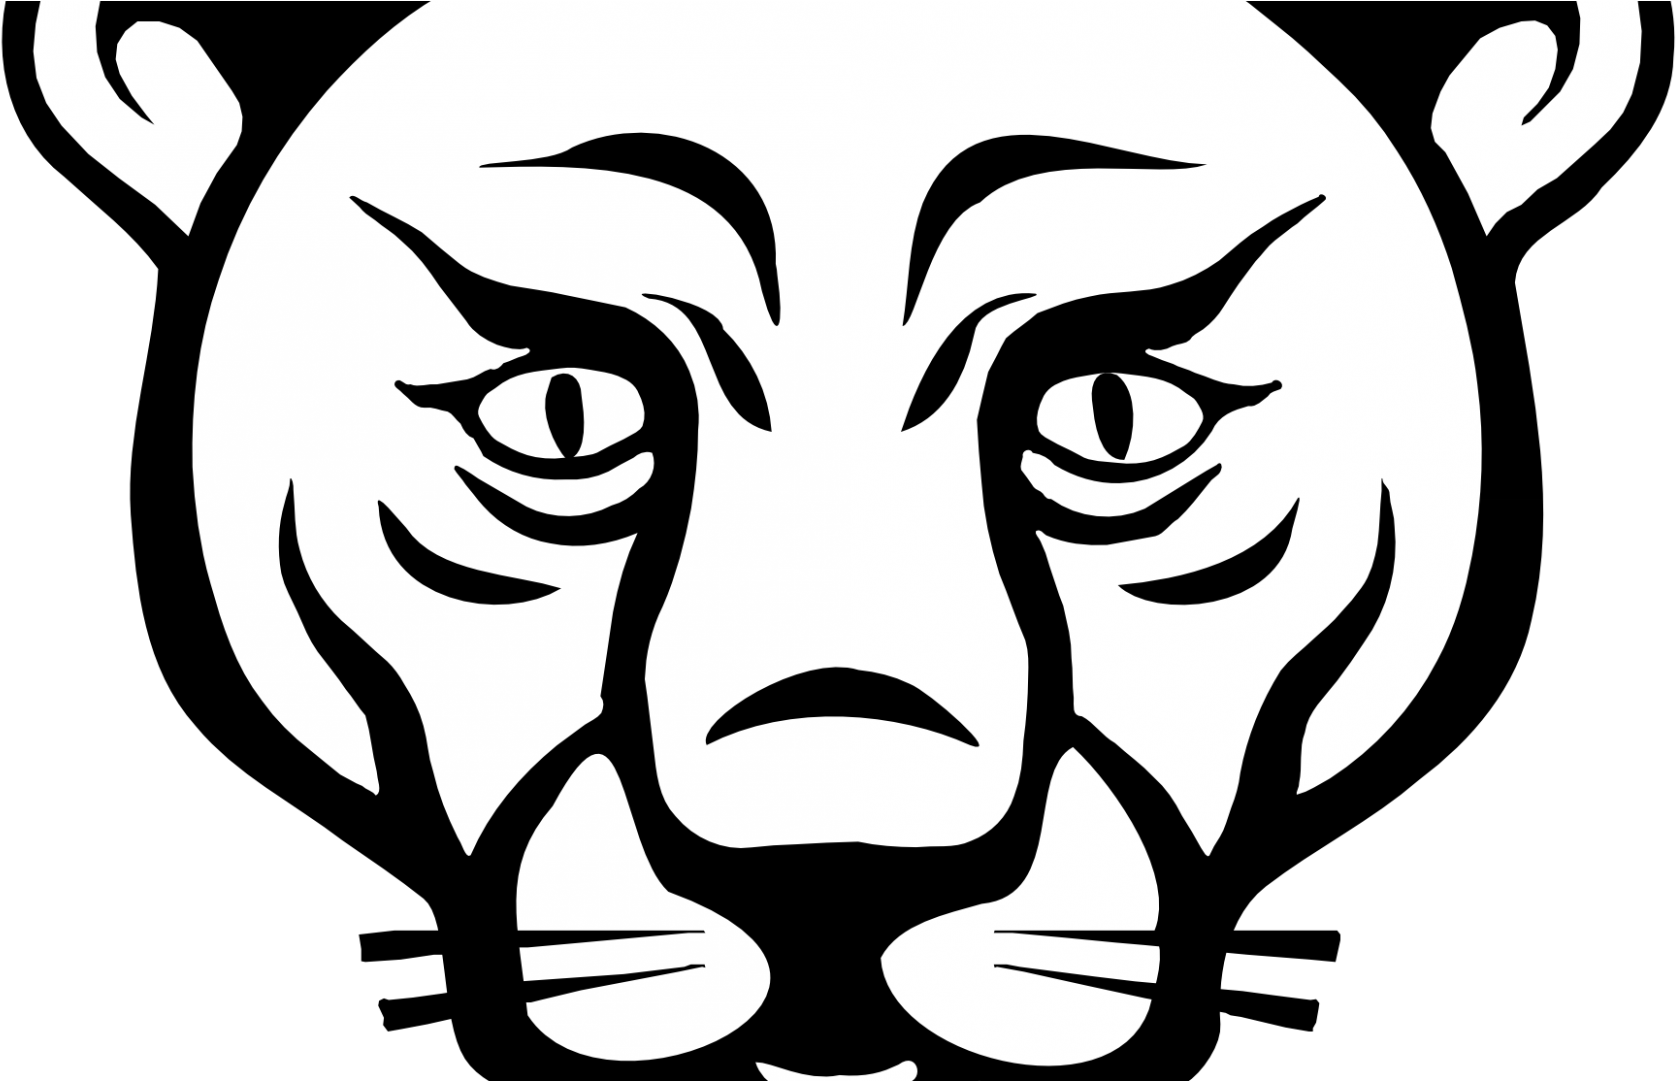 Animal Faces Lion Black White Line Art Coloring Sheet - Animals Faces To Draw (1920x1080)